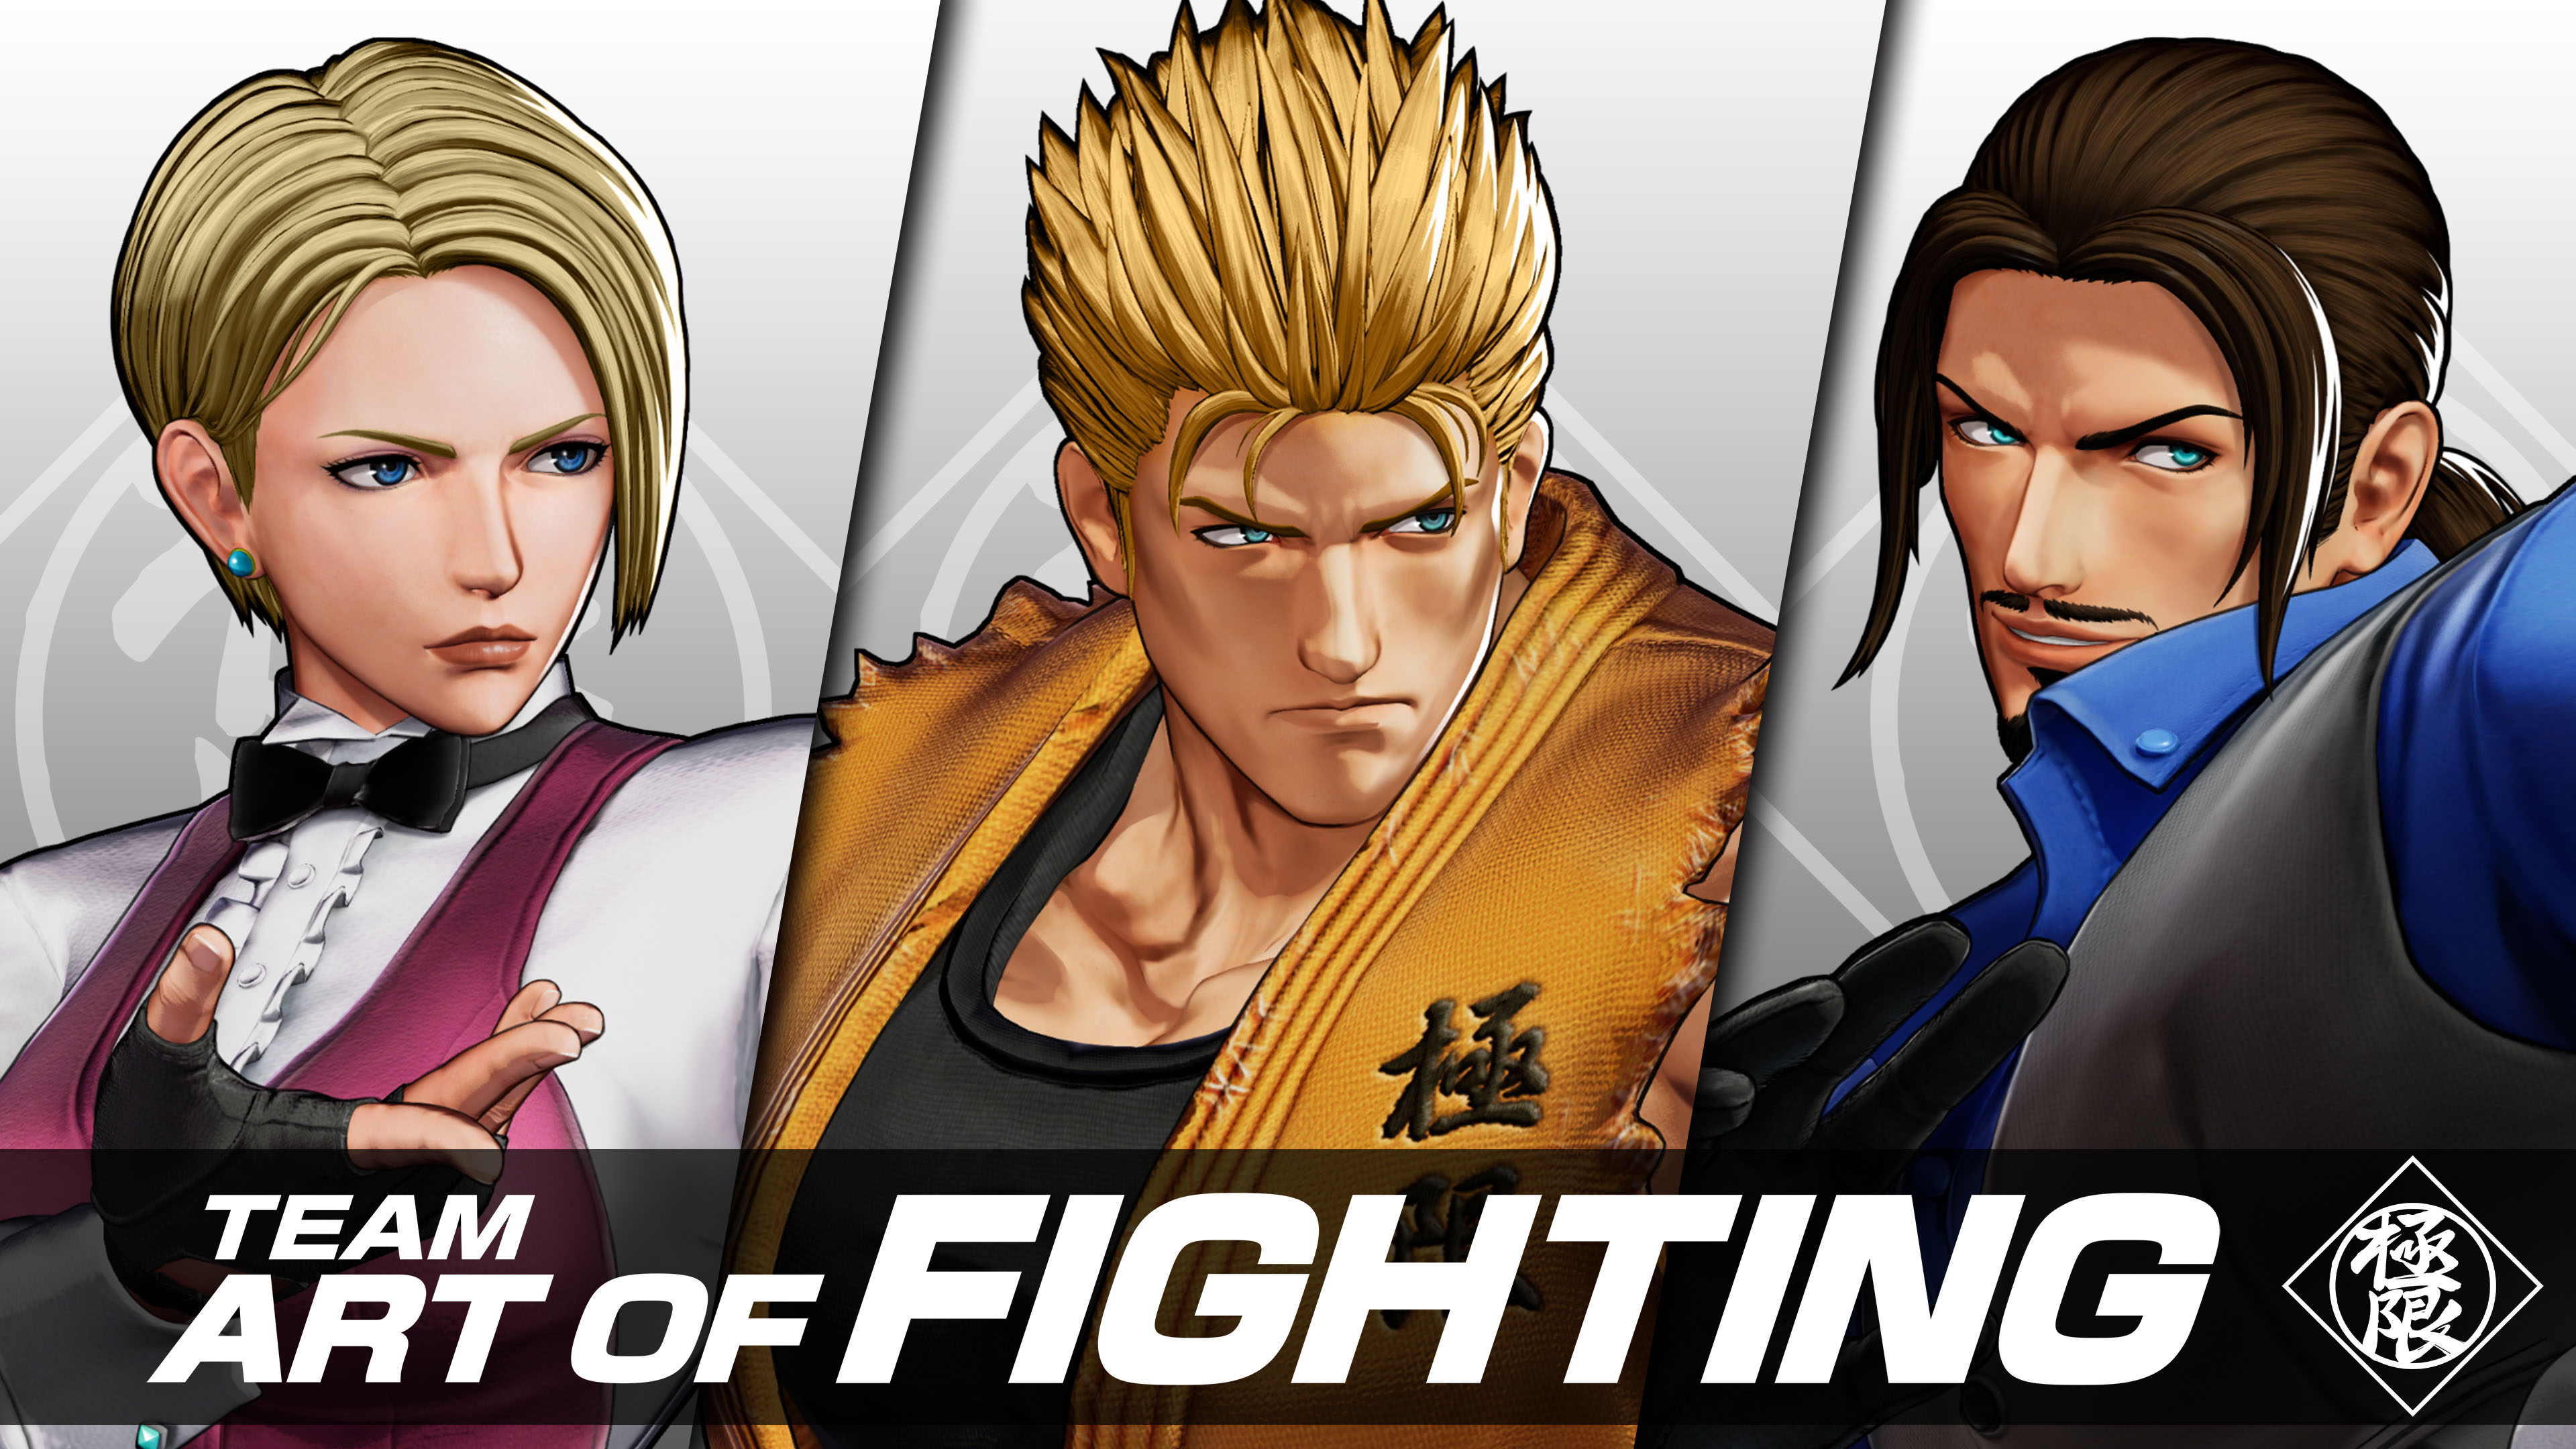 The King of Fighters 2003 - WOMEN FIGHTERS TEAM 